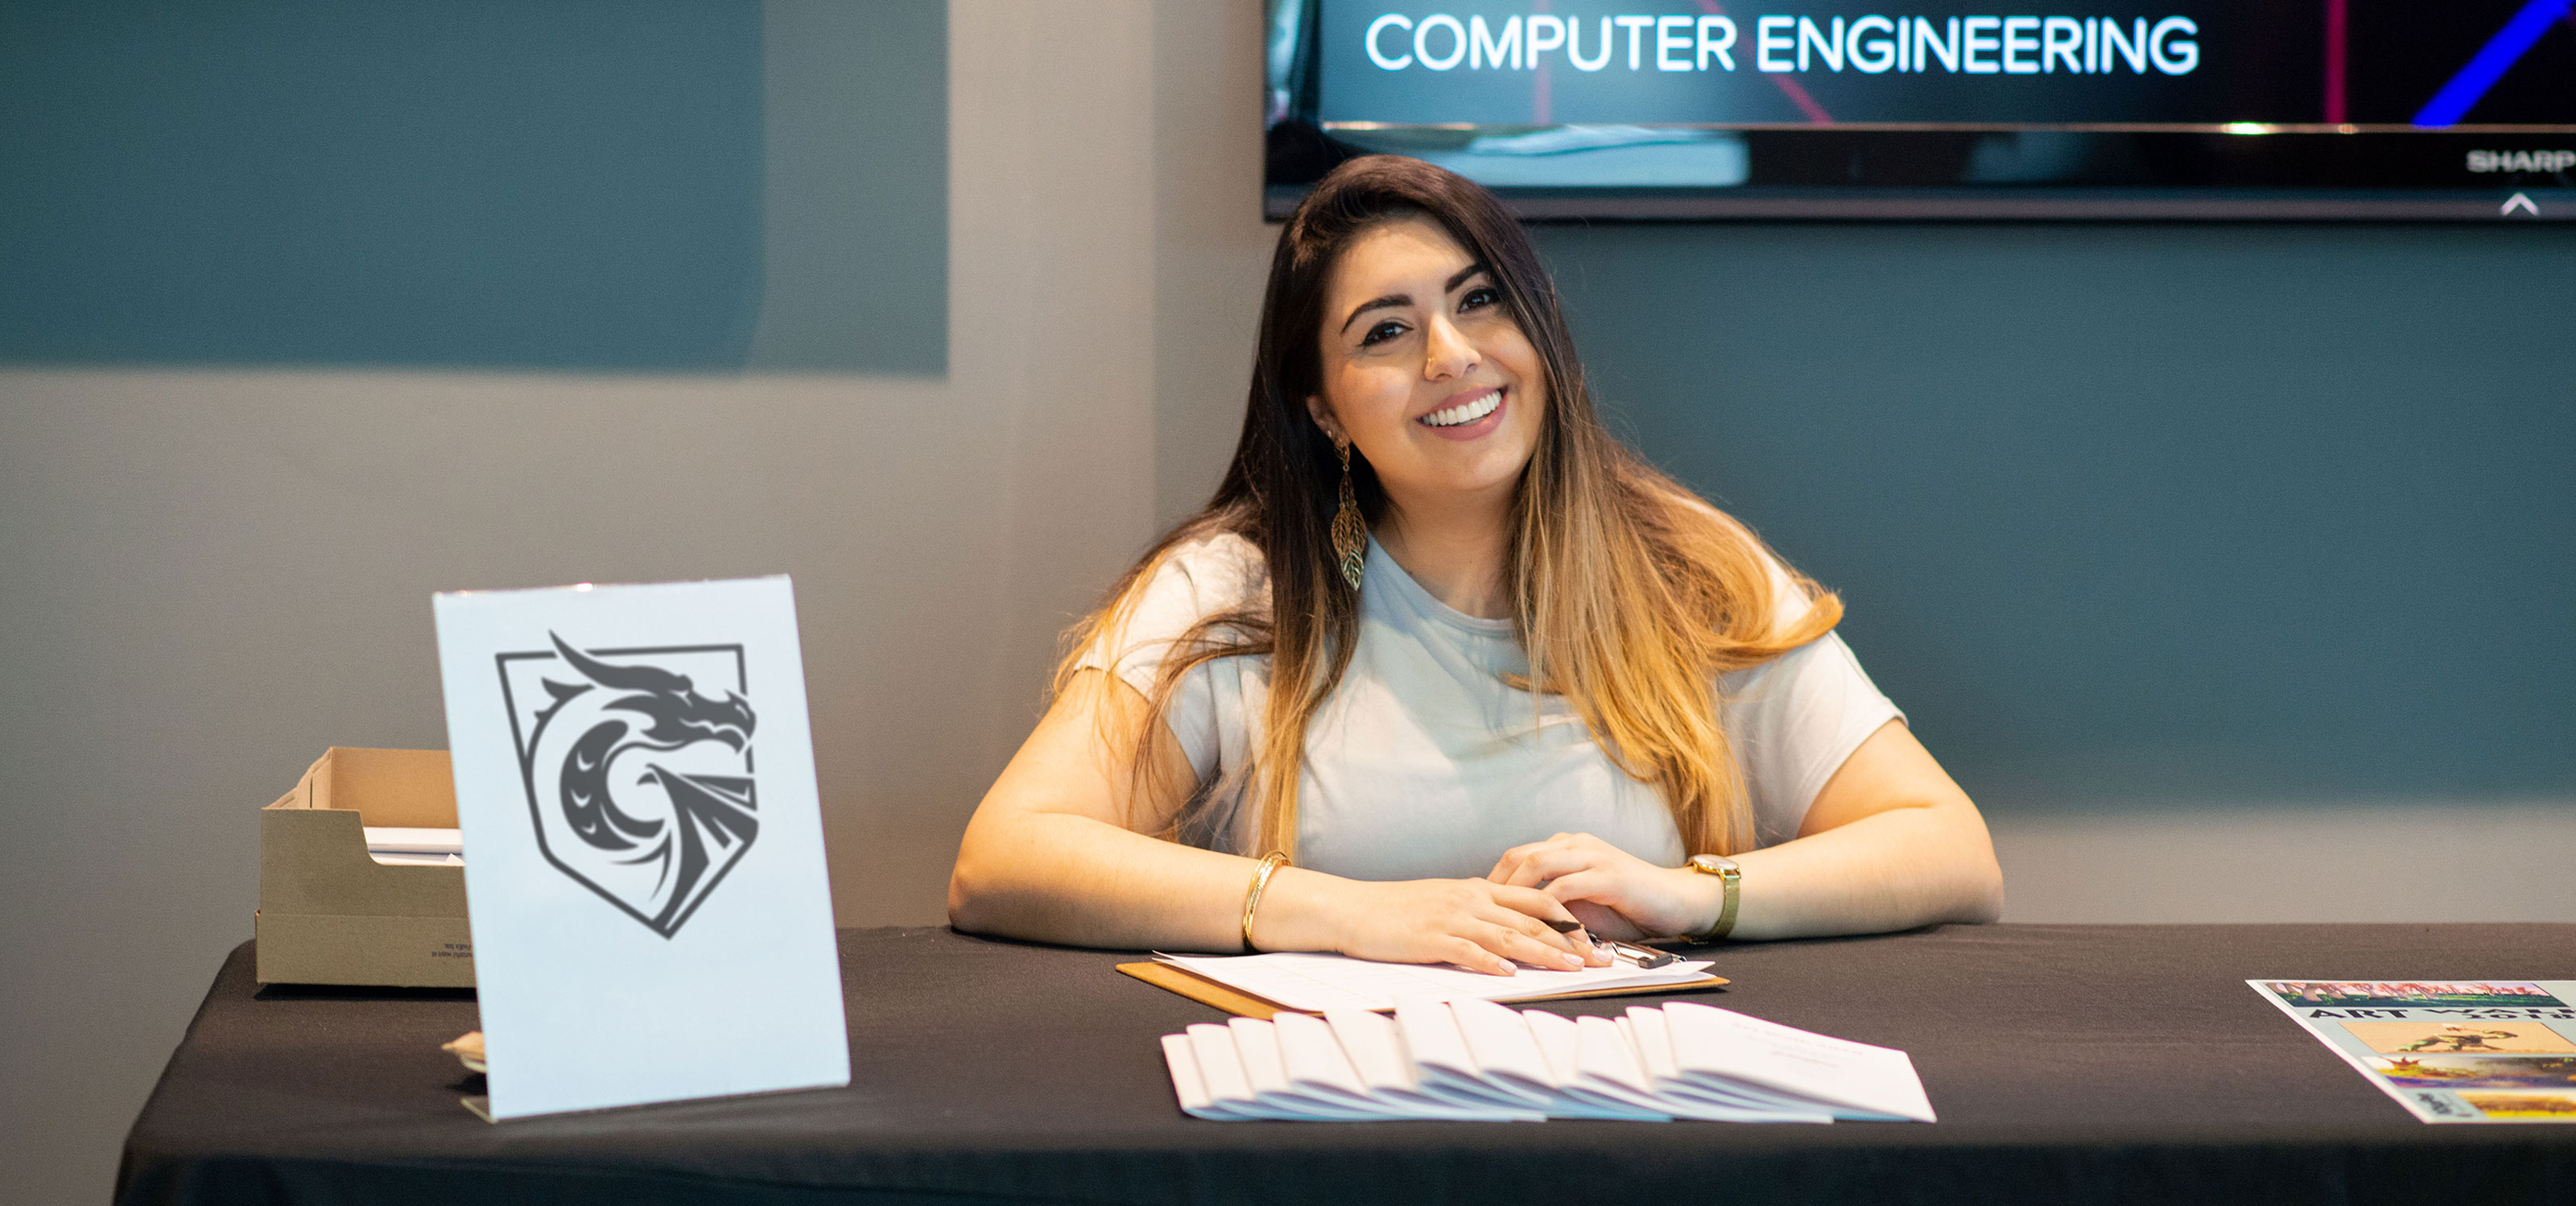 A smiling woman sits at a table welcoming people to an event on DigiPen's campus.